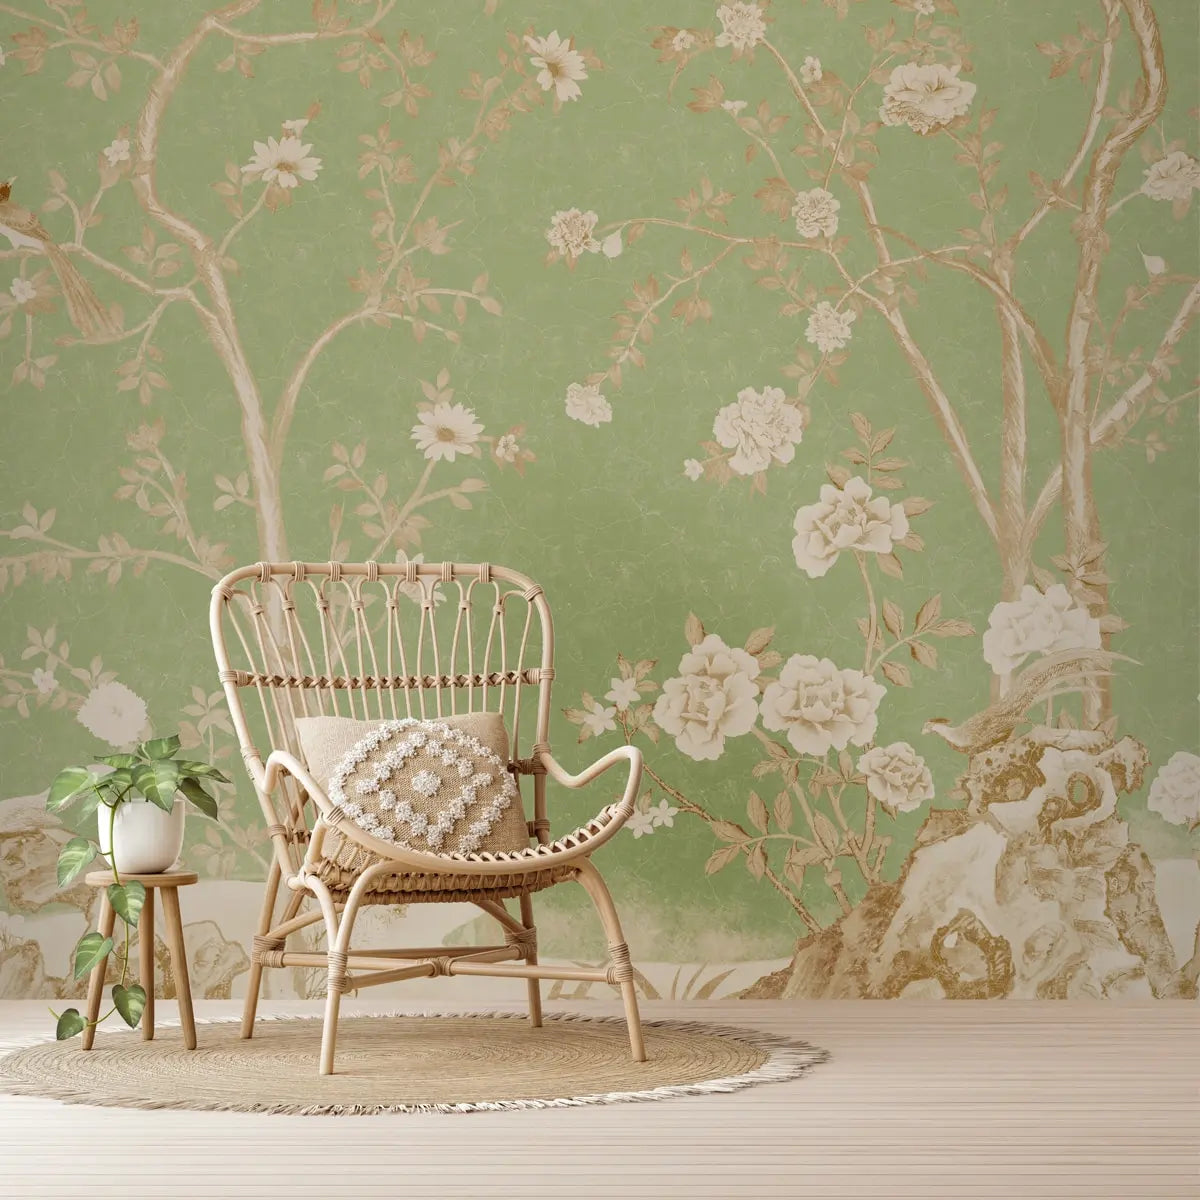 Mint Blossom Vintage Chinoiserie Wallpaper for Walls